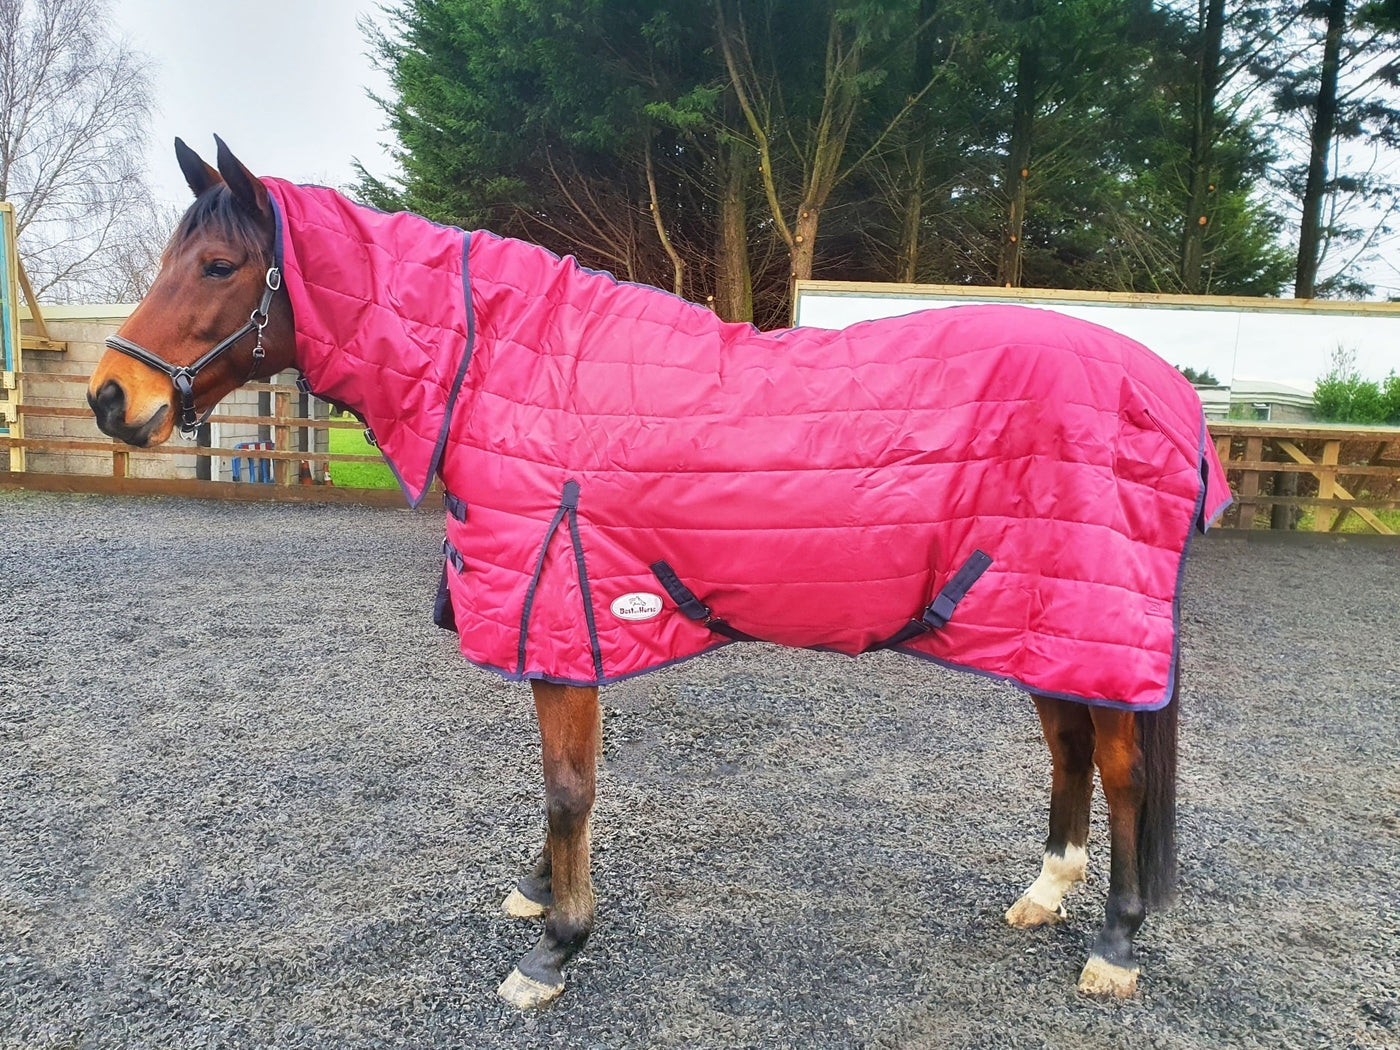 Best on Horse 250g Stable Combo Rug in Navy and Red